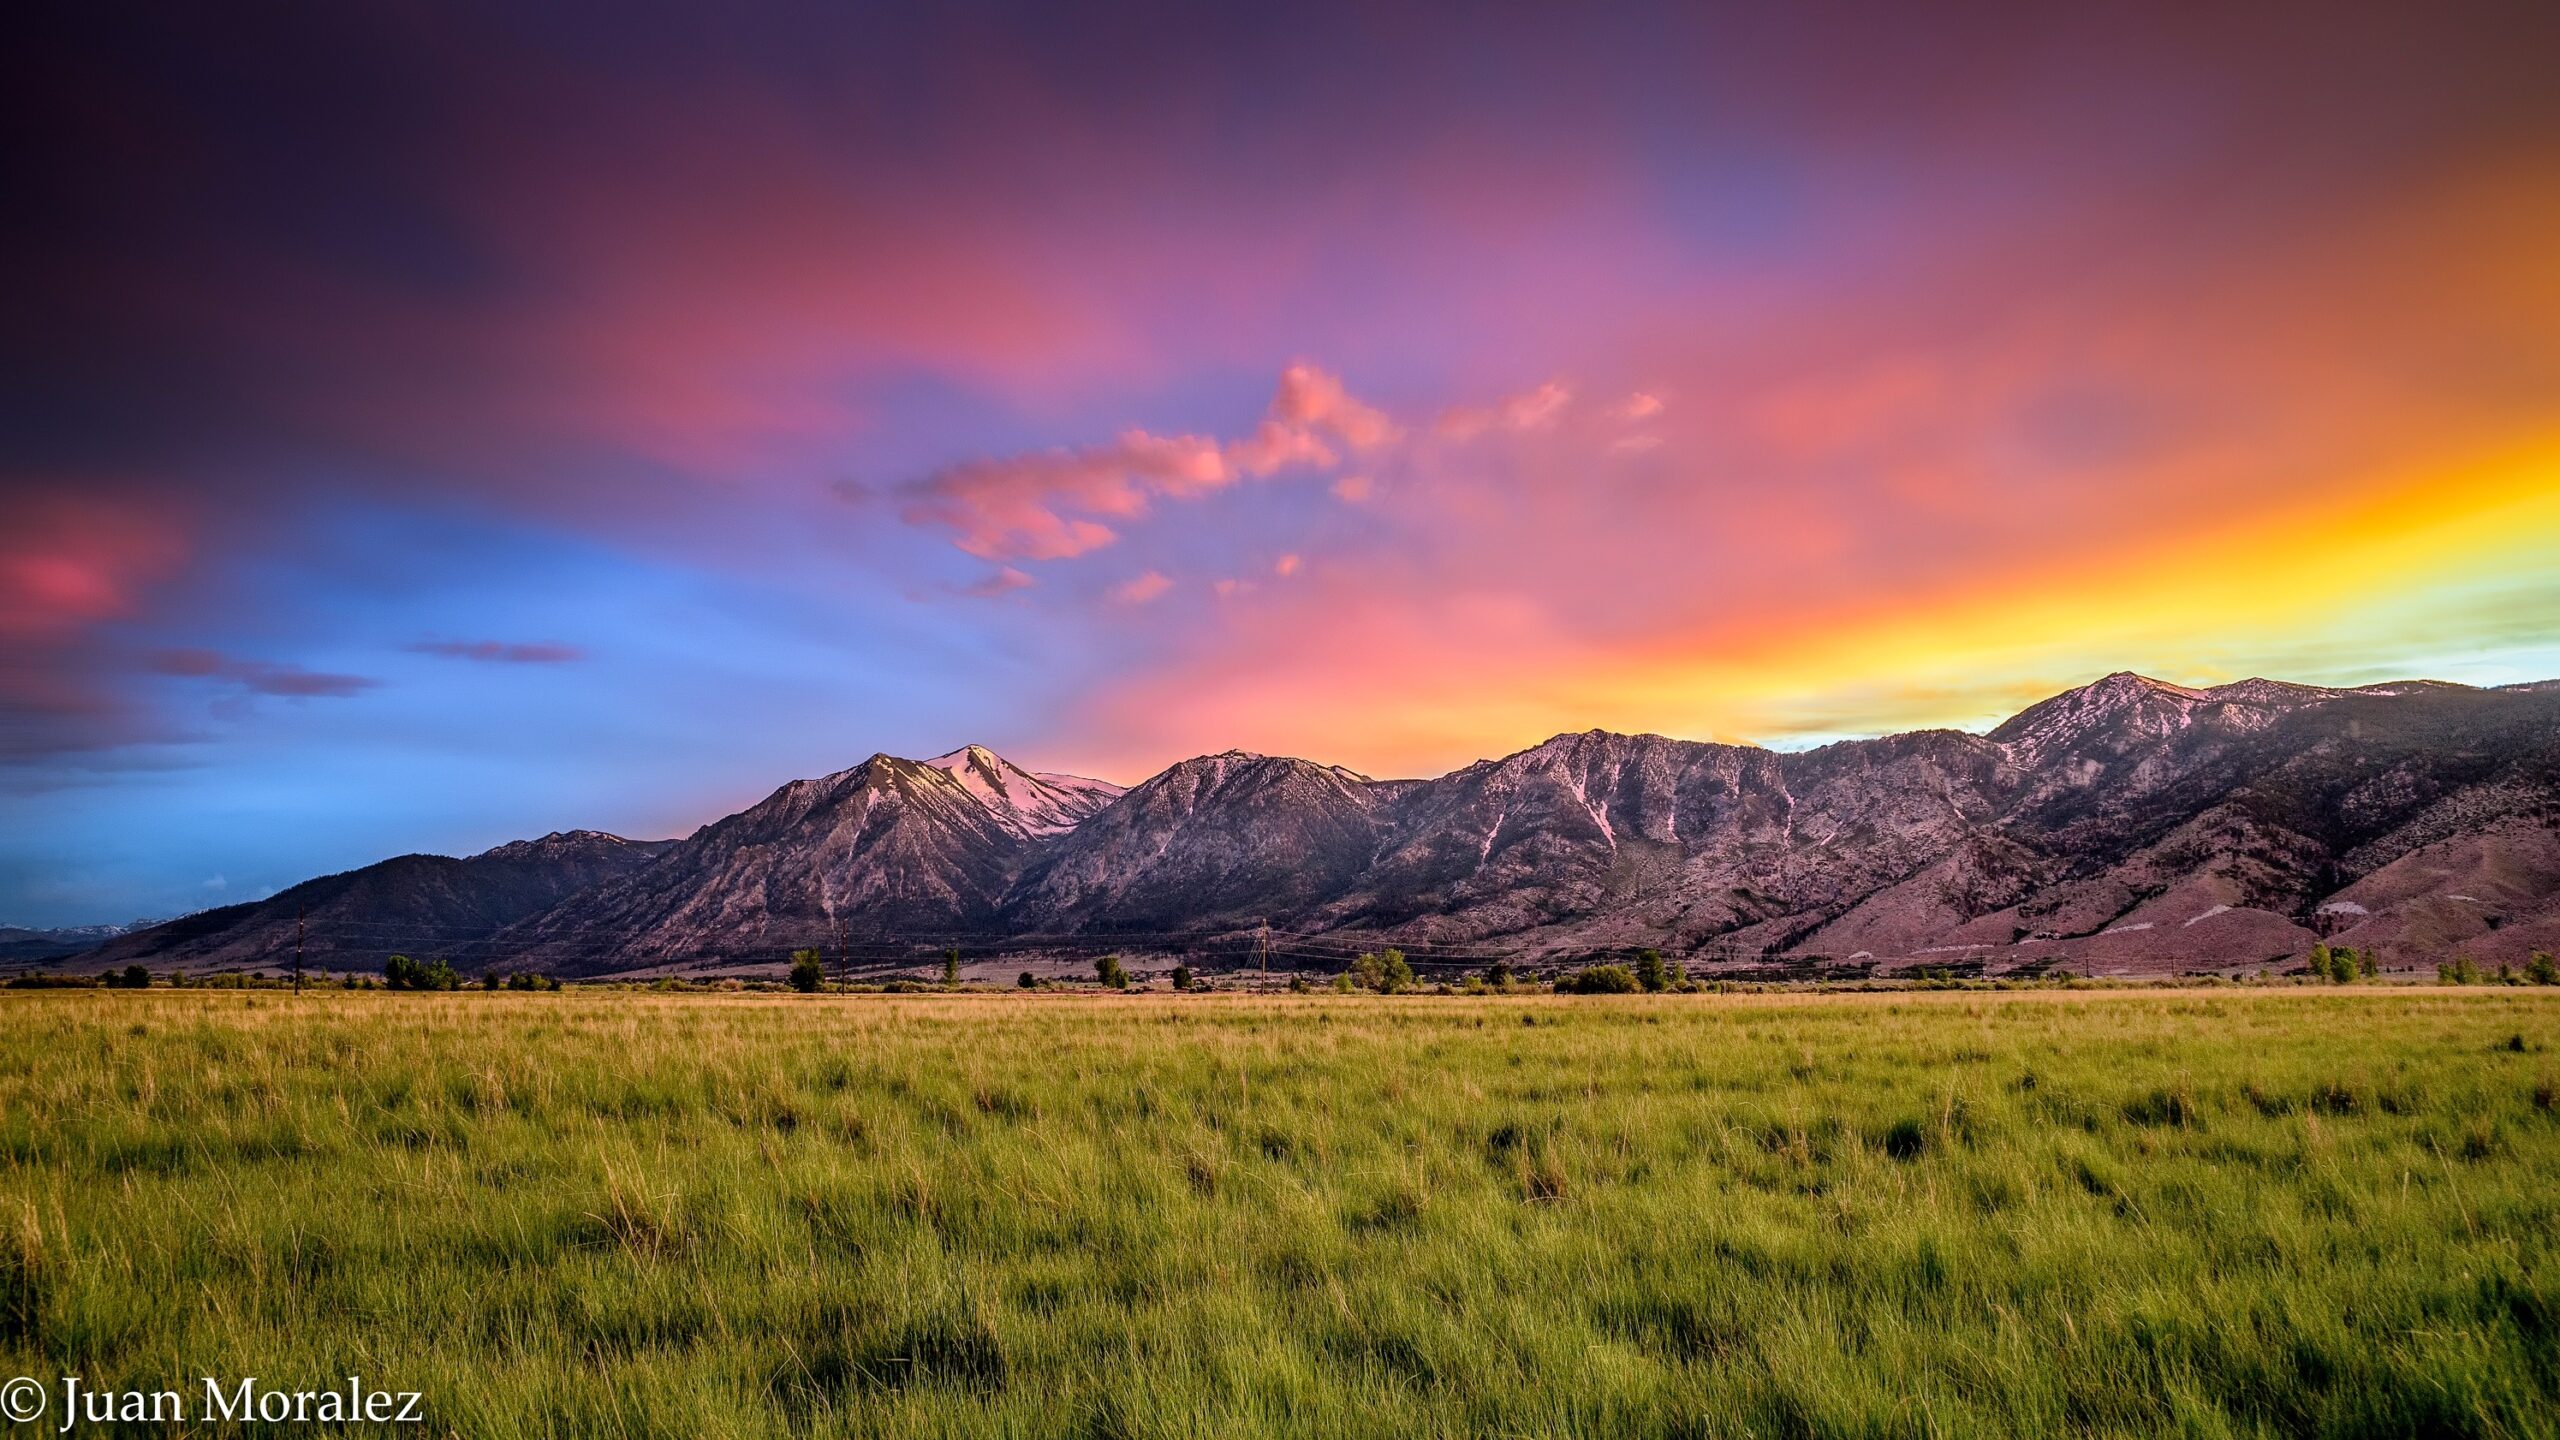 Carson Valley Visitors Authority